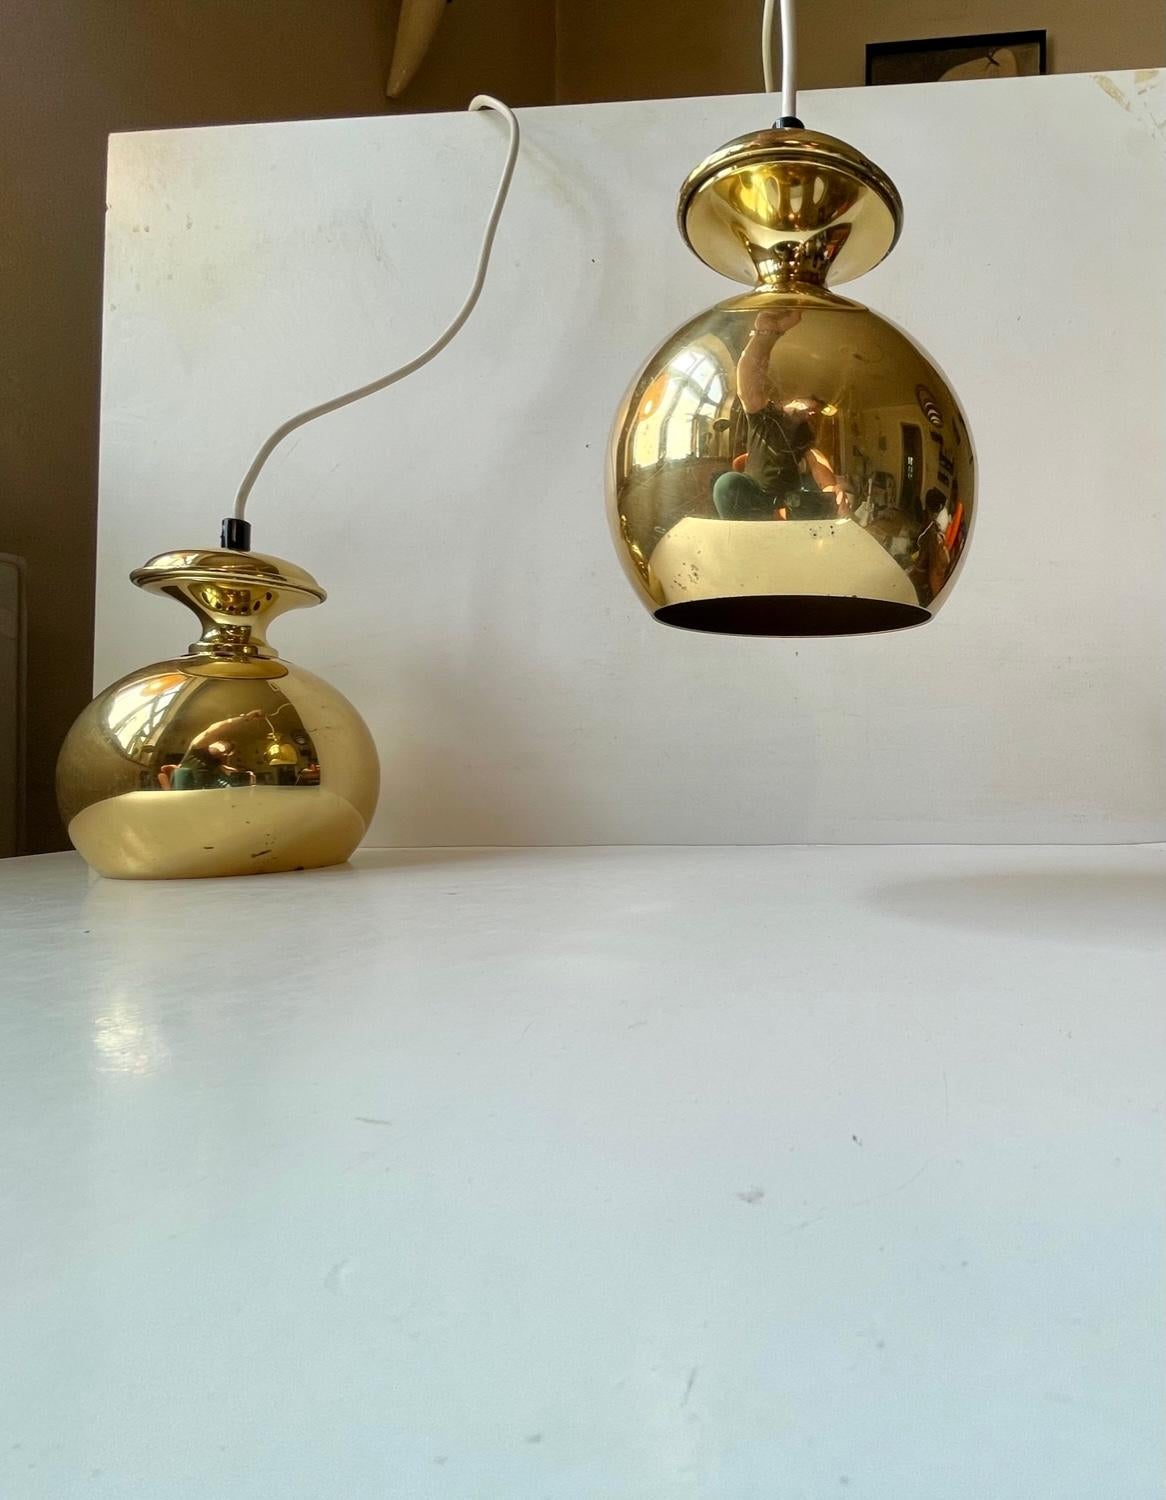 Pair of bell shaped pendant ceiling lights designed by Hans-Agne Jakobsson for Markaryd Sweden, 1960s. They feature solid brass top and shade with a reflective golden interior. Suitable for kitchen, cosy corner lightning, over your midcentury desk